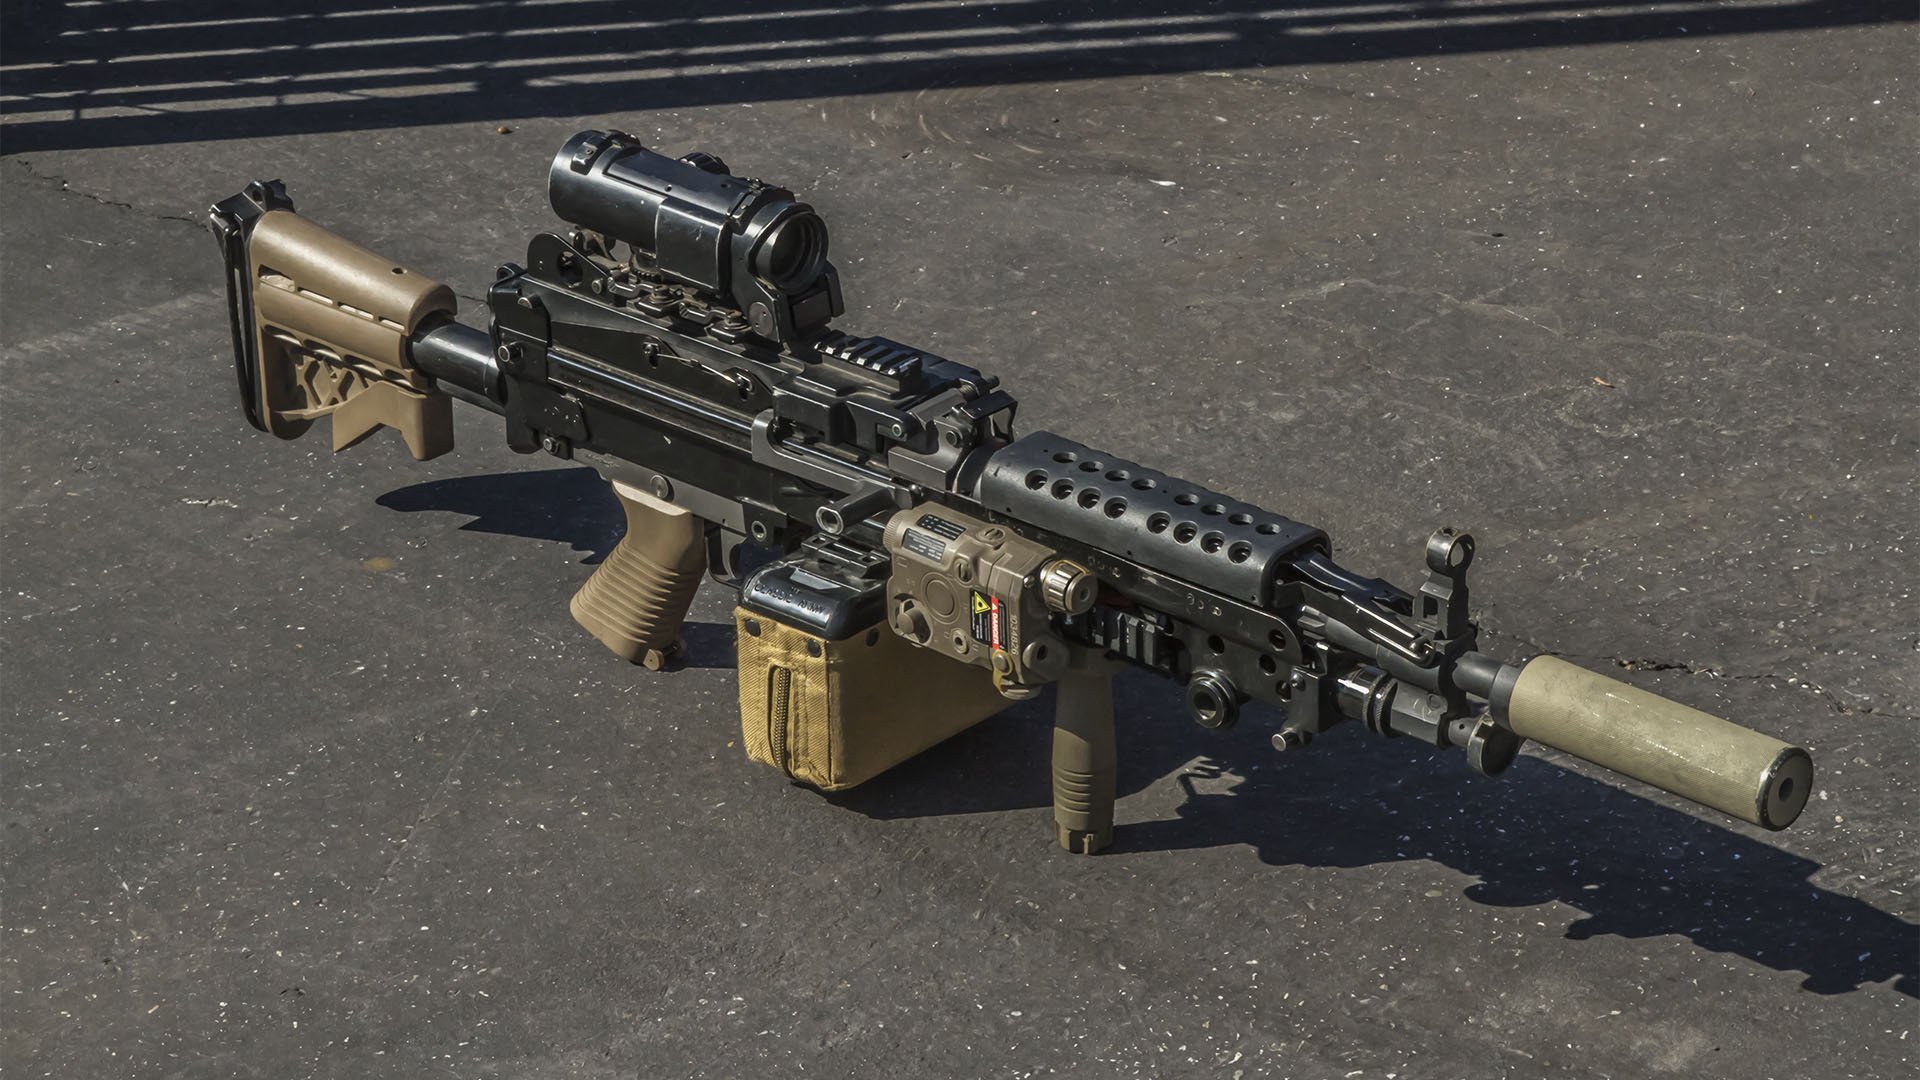 Our Tech Taylor's M249 by Classic Army